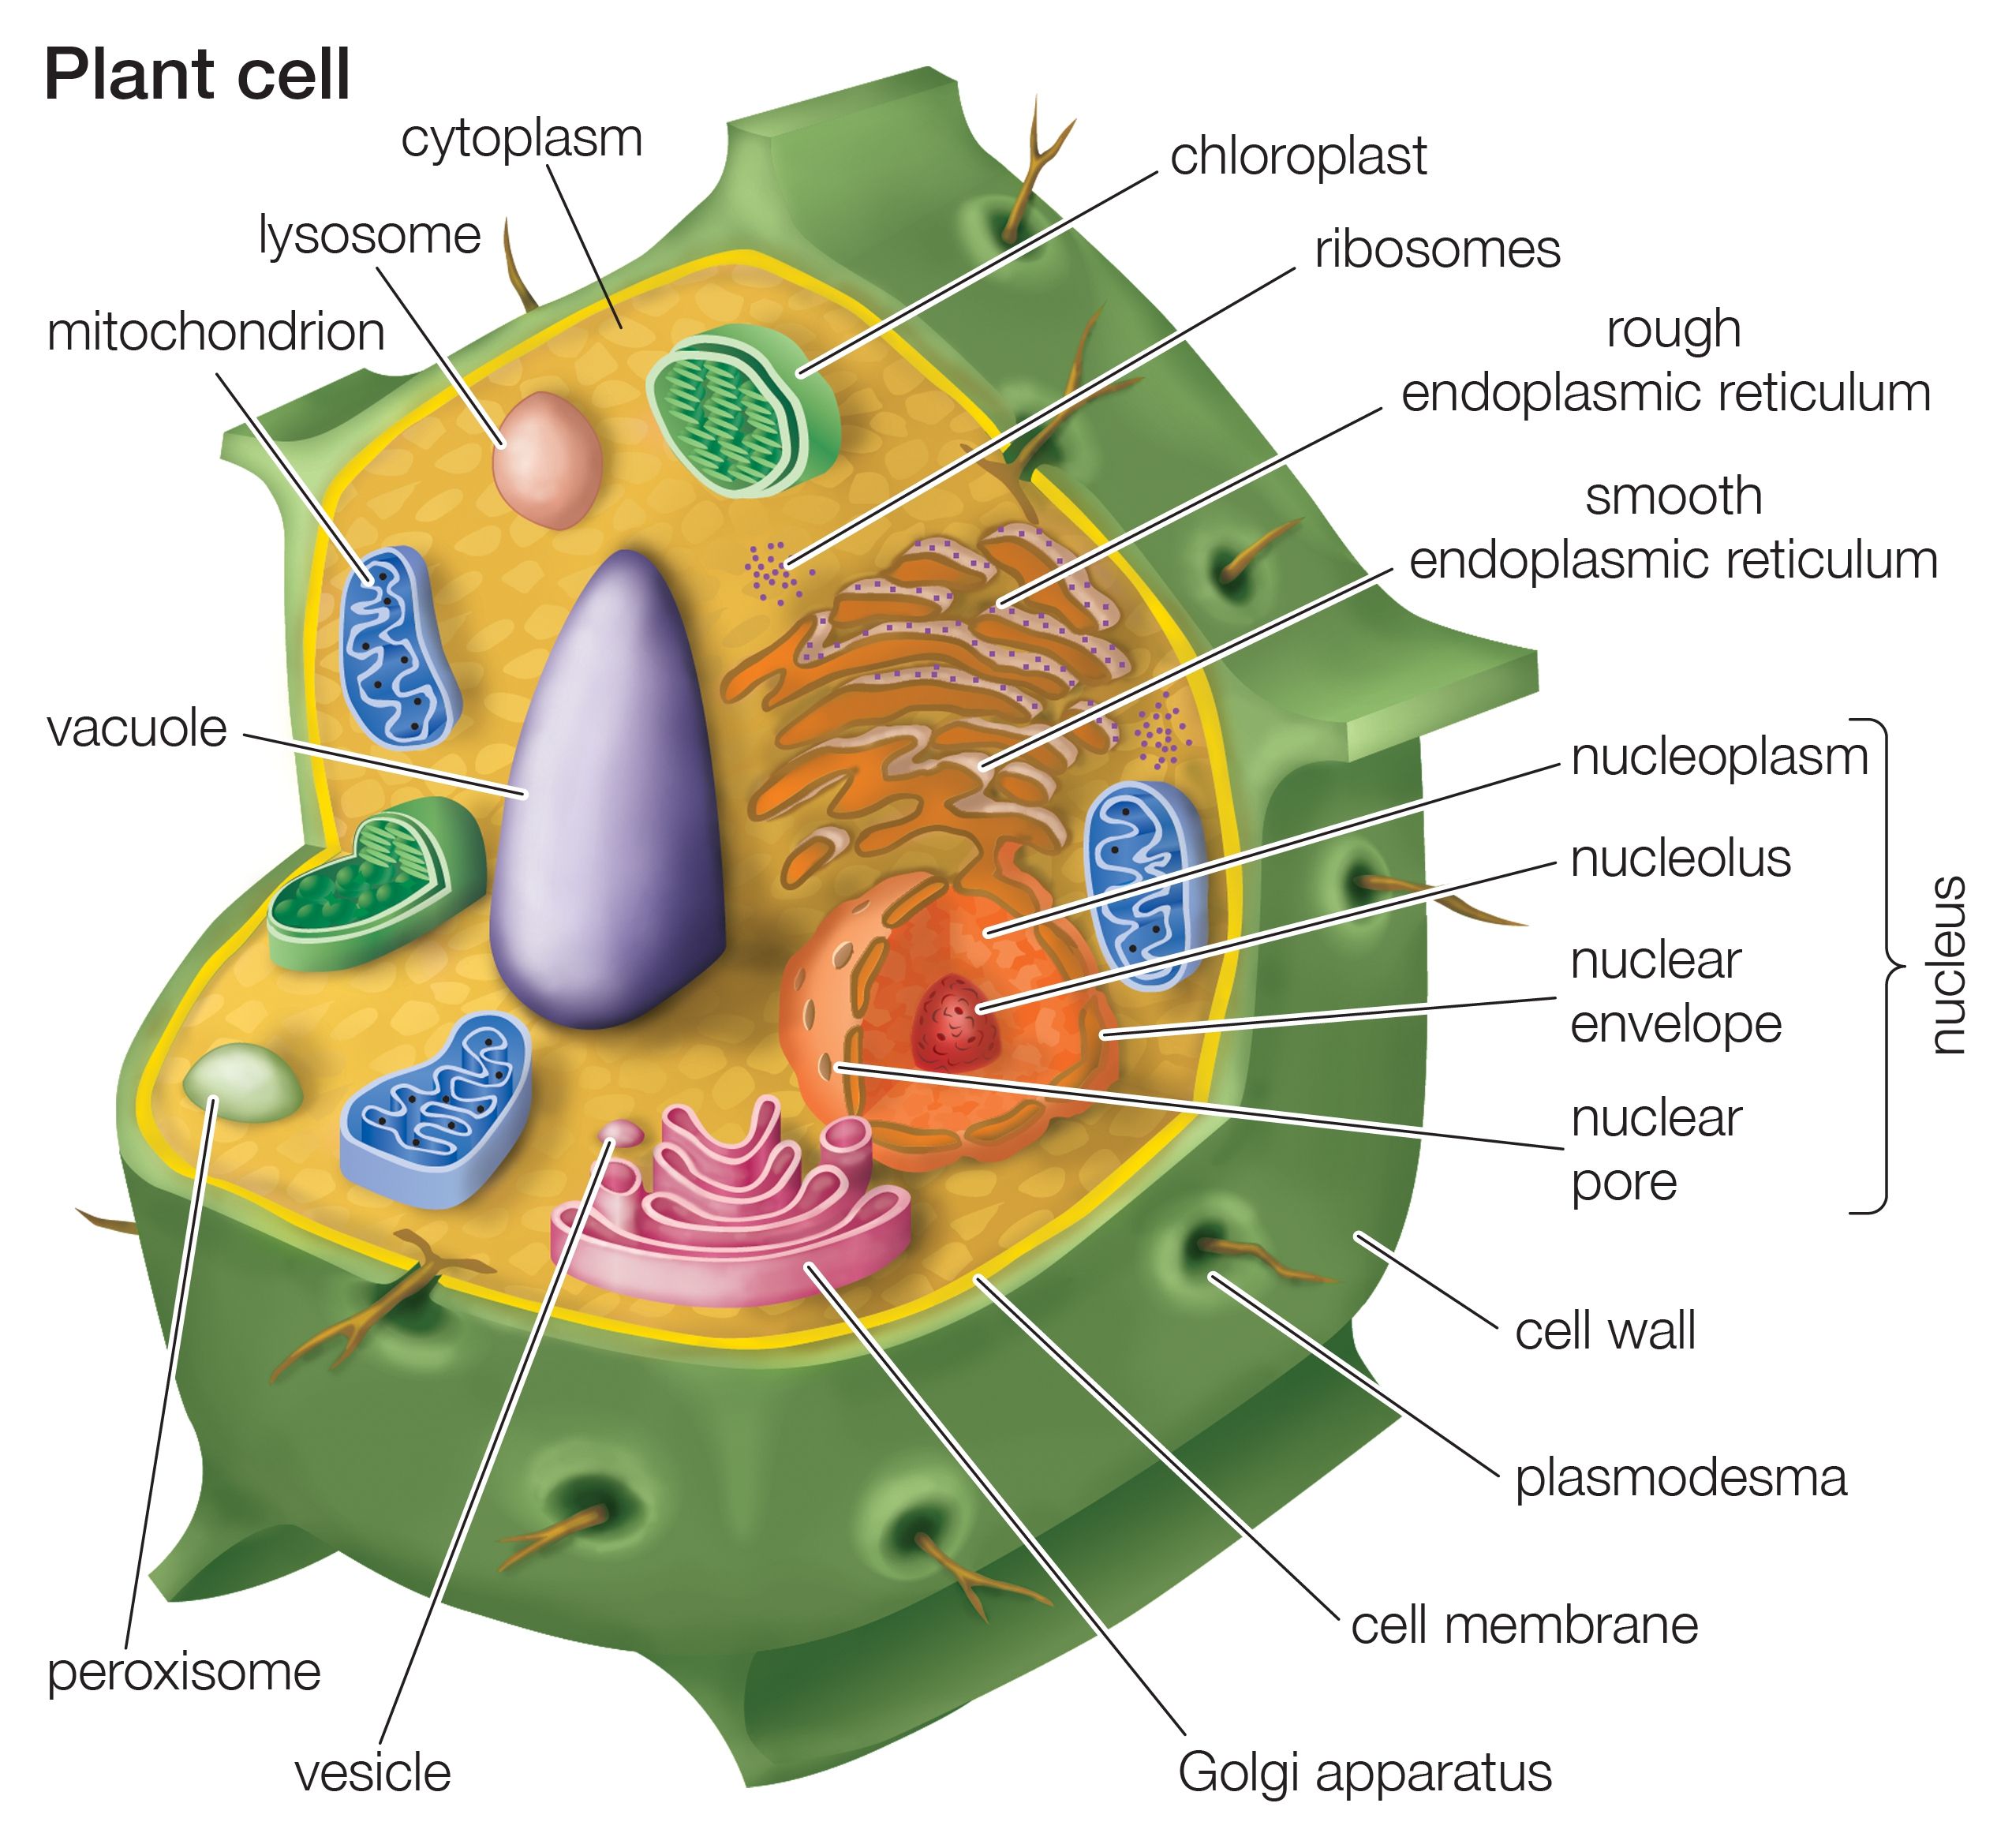 Learn the Different Types of Plant Cells